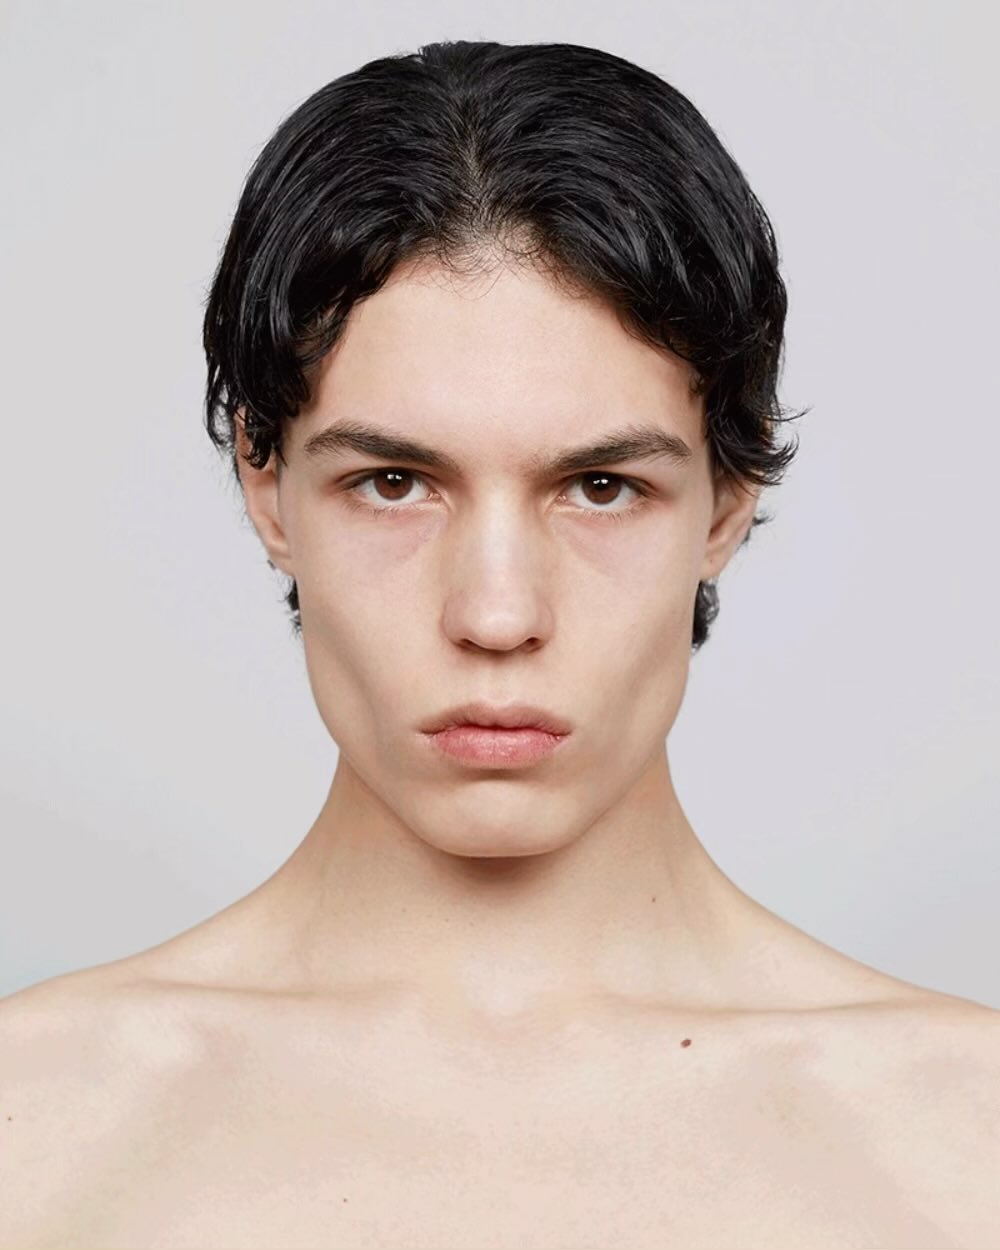 Boys of AW23: Introducing some of our exciting new faces for the show season